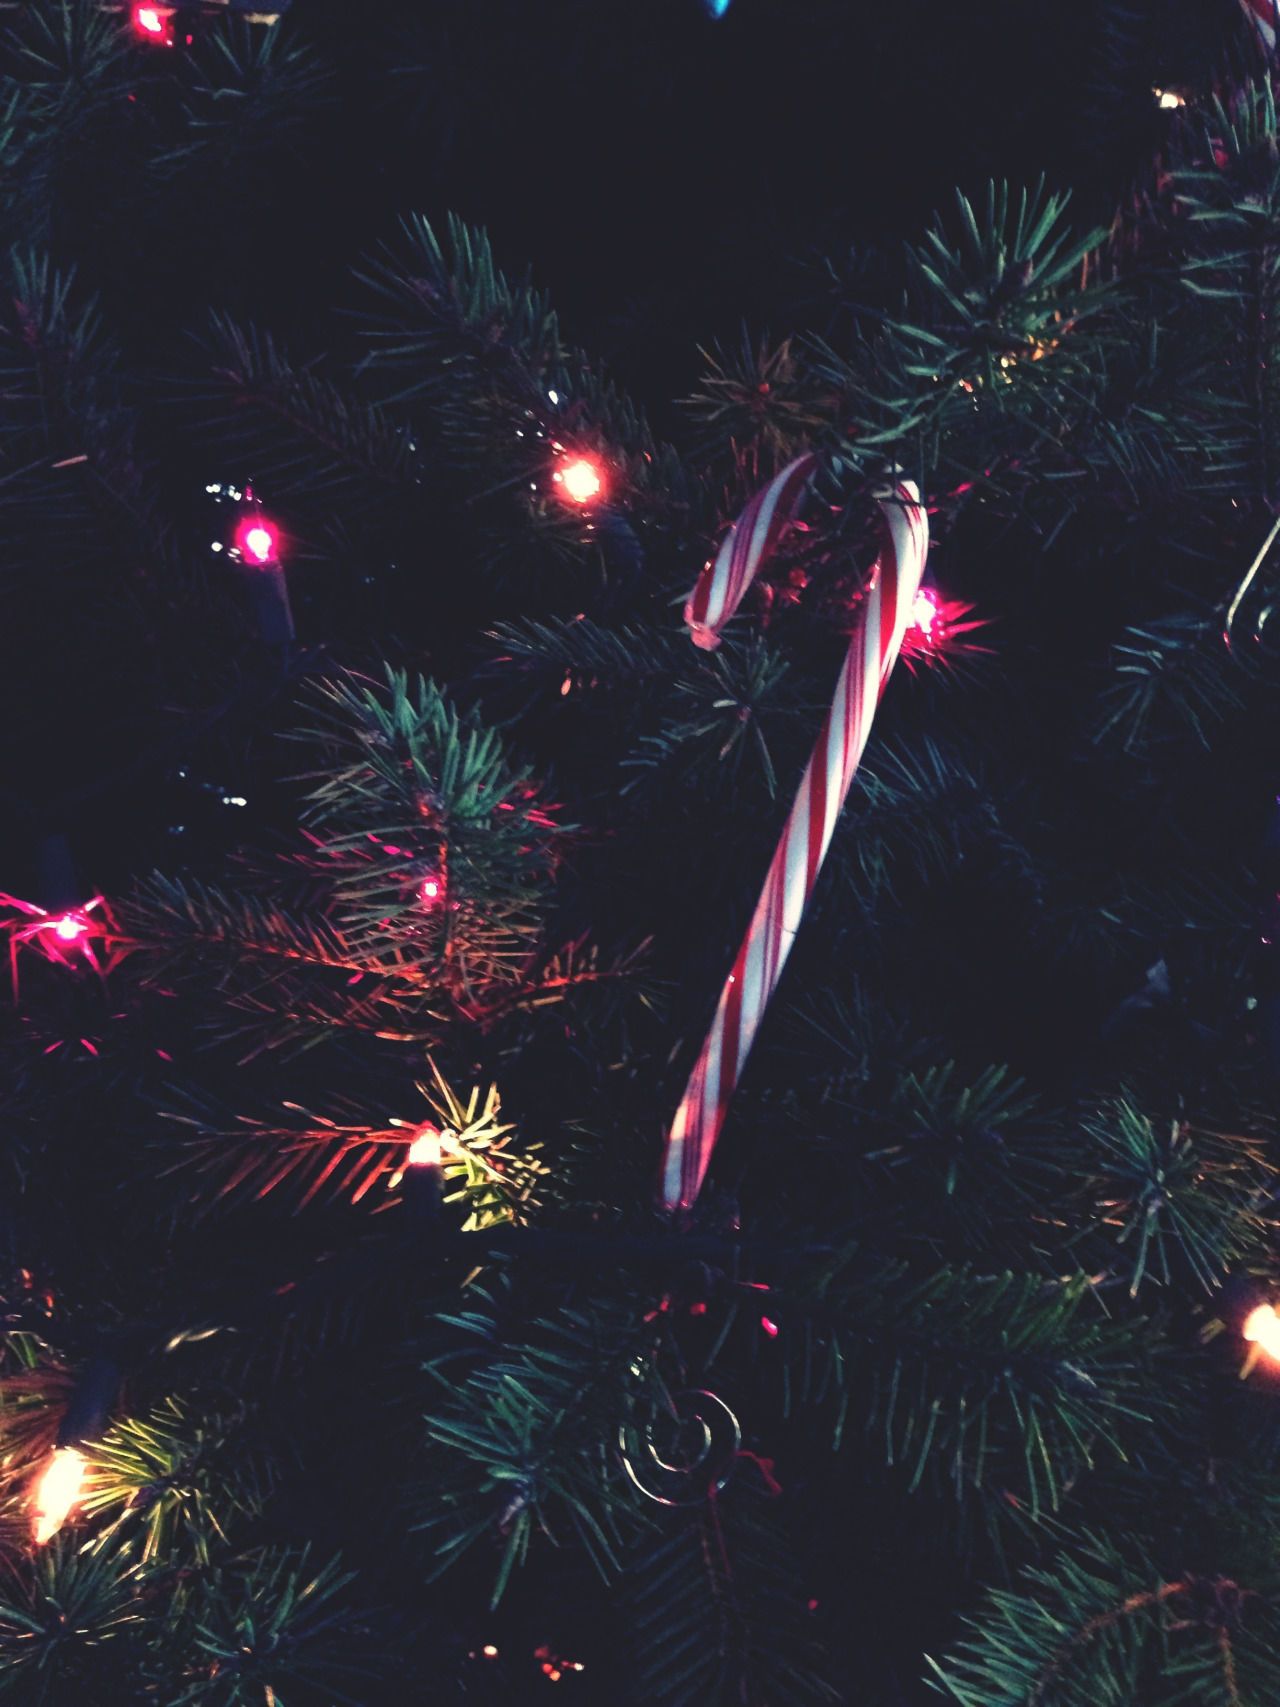 Single Candy Cane Christmas Ornament Decoration Picture, Photo, and Image for Facebook, Tumblr, , and Twitter